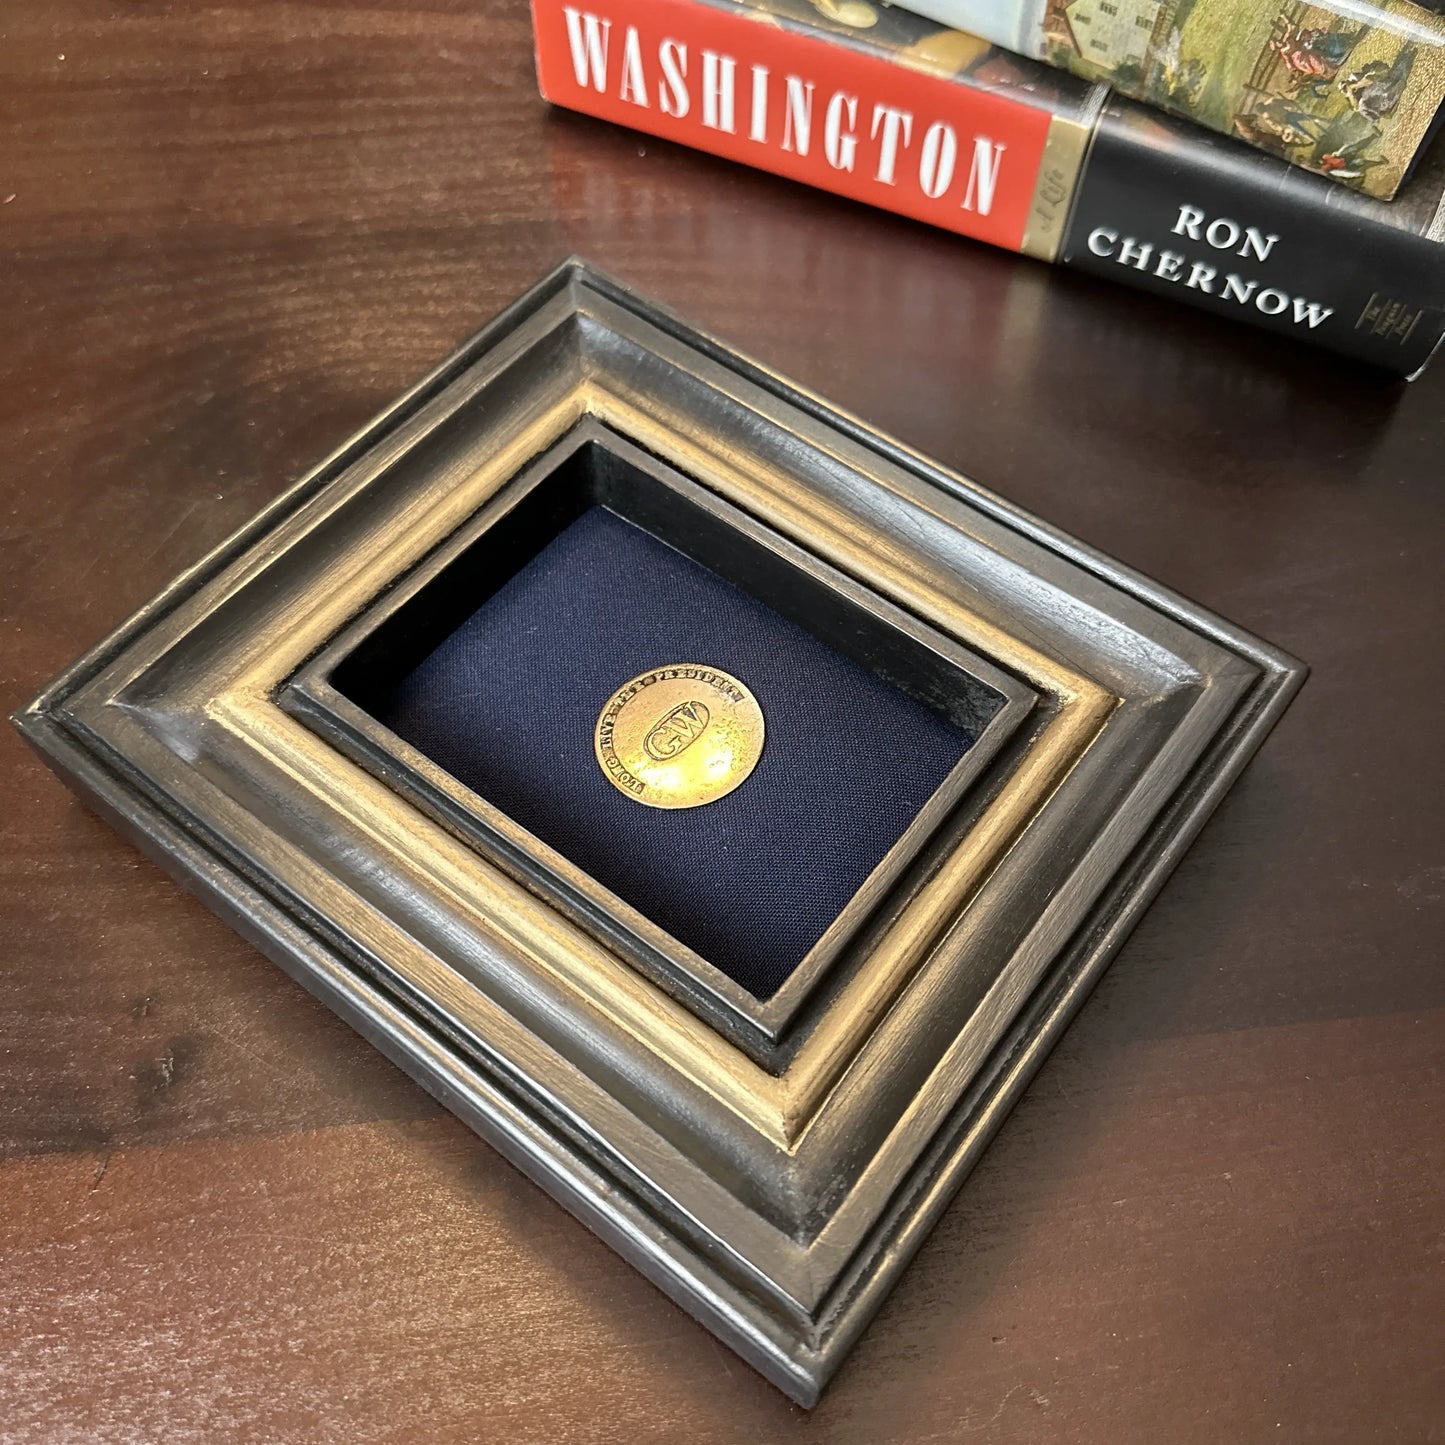 George Washington 1789 "GW" Inaugural Button — "LONG LIVE THE PRESIDENT" — Includes certificate of authenticity